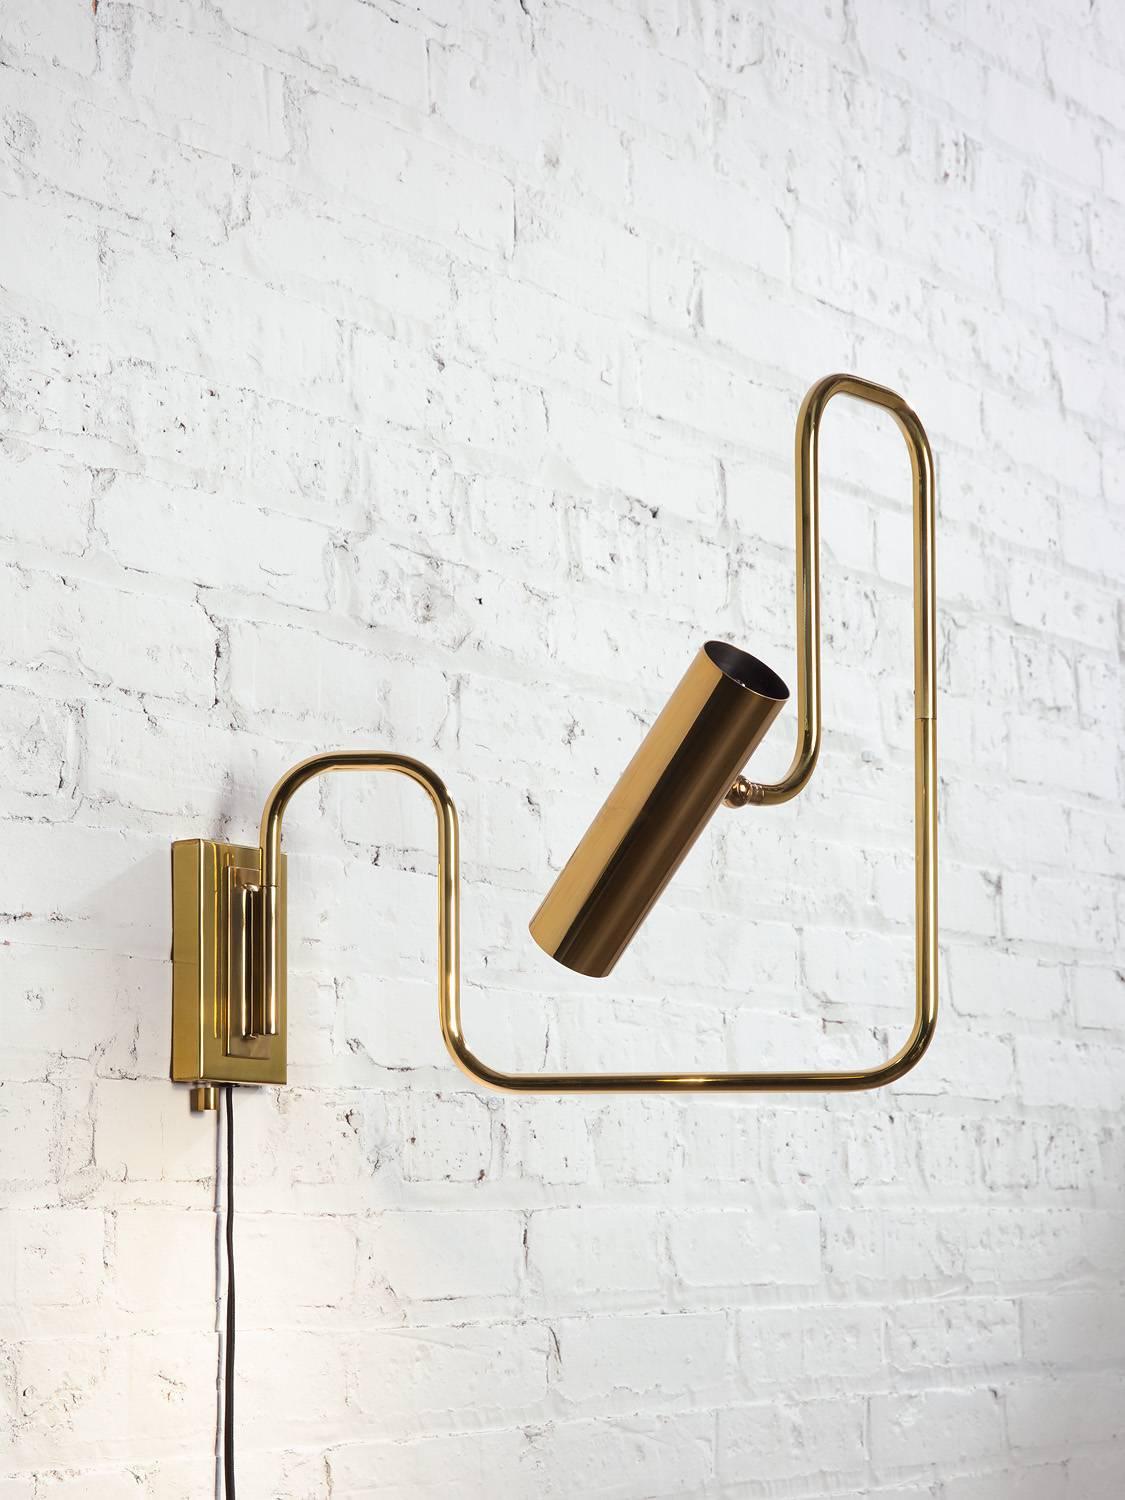 The Pivot LED series with its articulated arm and adjustable head this brass lamp, is not only multidimensional, but it is an ever changing line drawing that nestles into a room. Reminiscent of Industrial piping, the warmth of the refined material